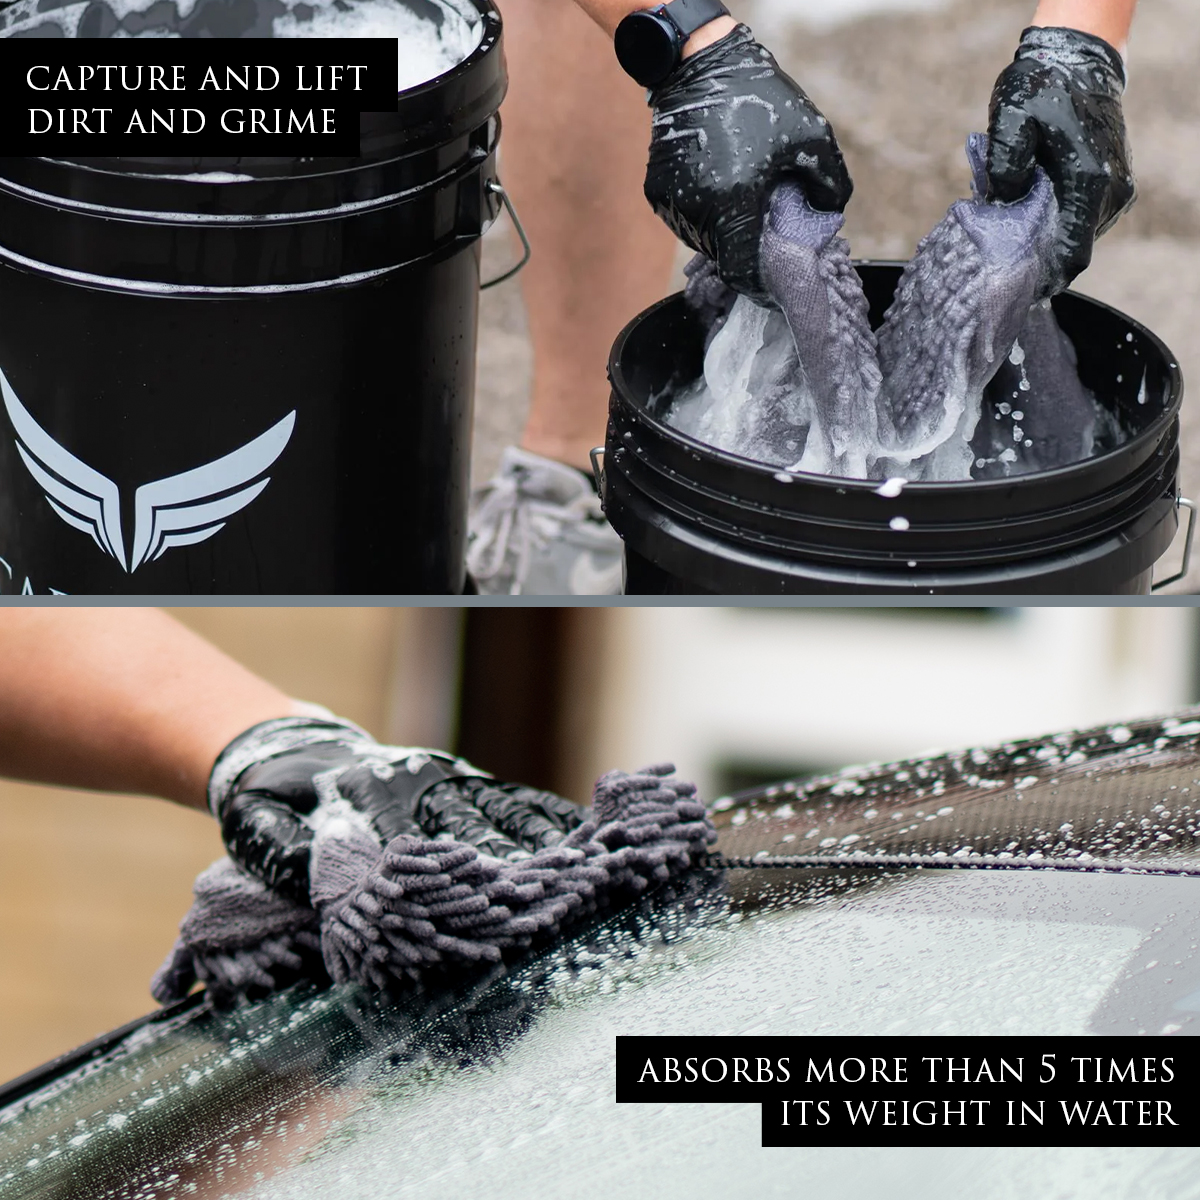 Image on left shows two wash mitts being sloshed about and rinsed in a Car Gods bucket using the two-bucket method. Image on right shows Microfibre Wash Mitt being used to clean a car with the microfibre noodles. Text: Capture and lift dirt and grime. Absorbs more than 5 times its weight in water.